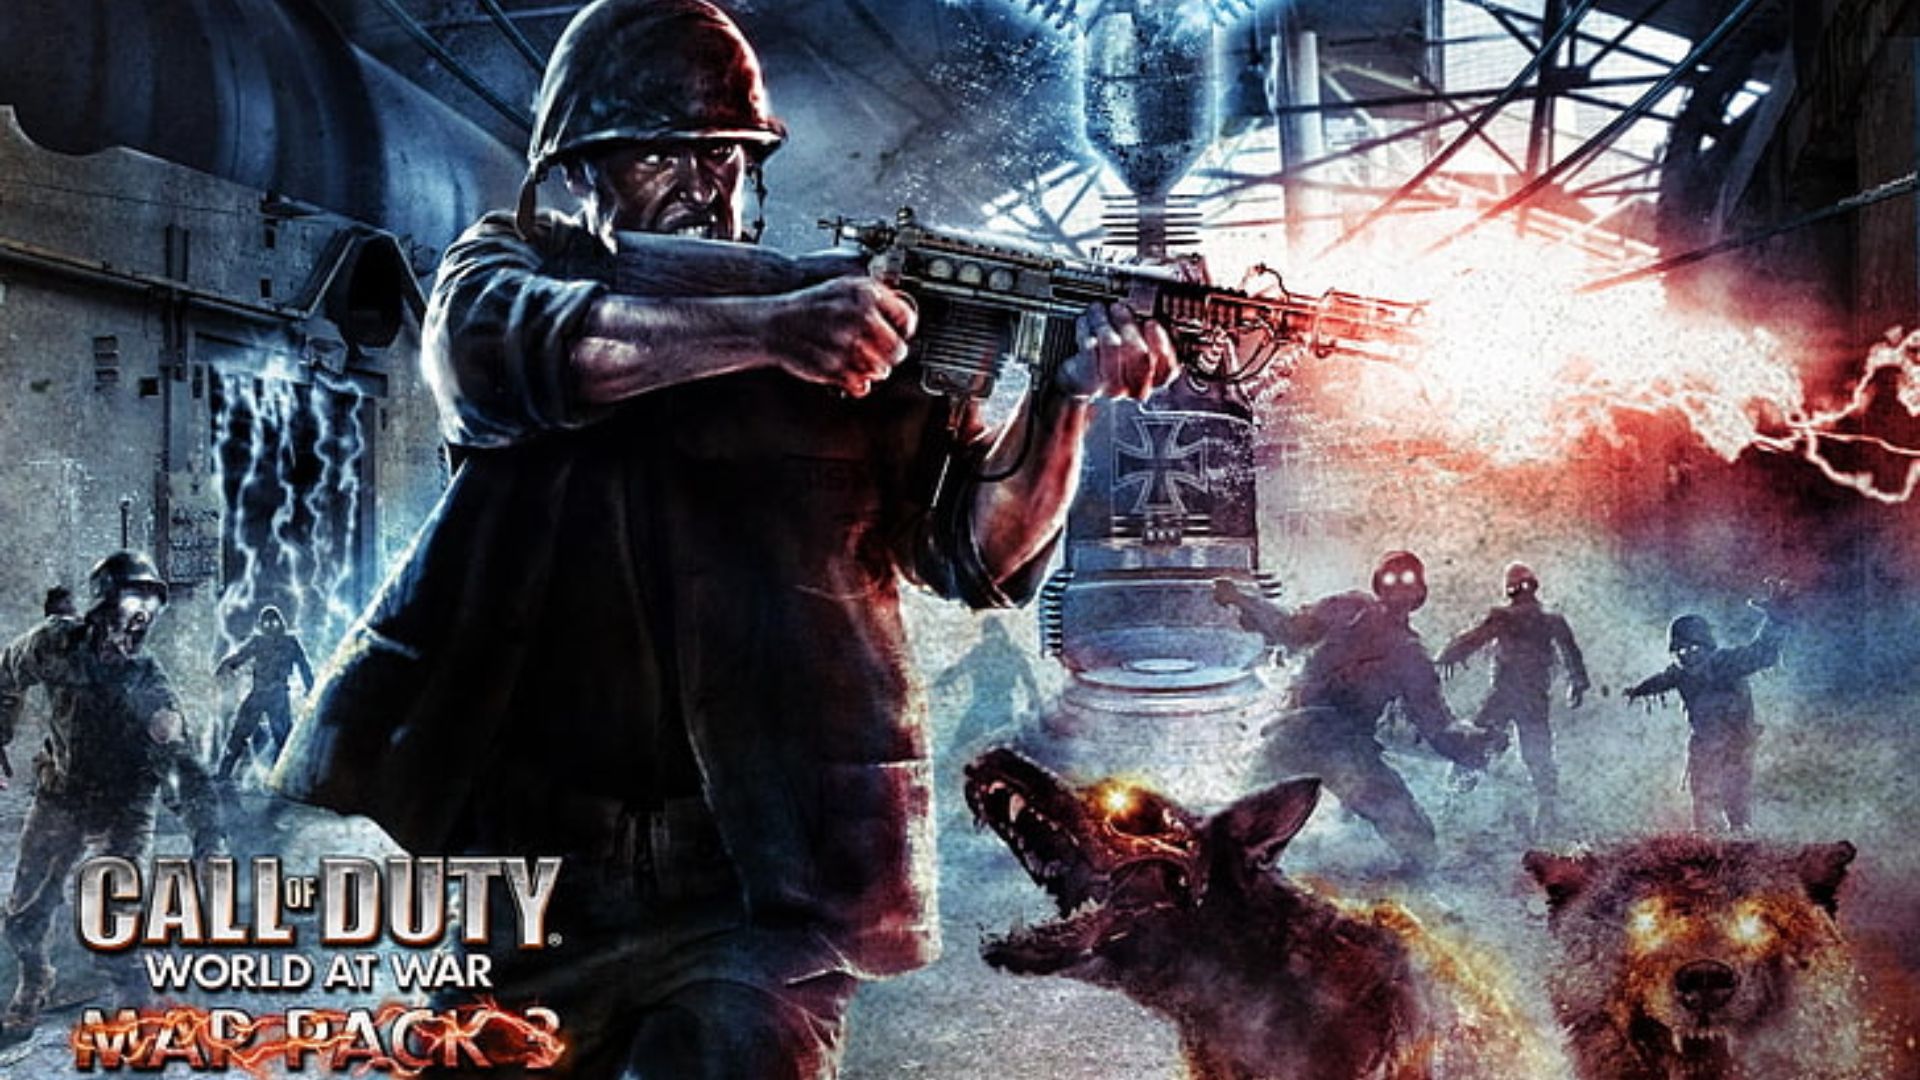 Vanguard Zombies Call of Duty Wallpapers